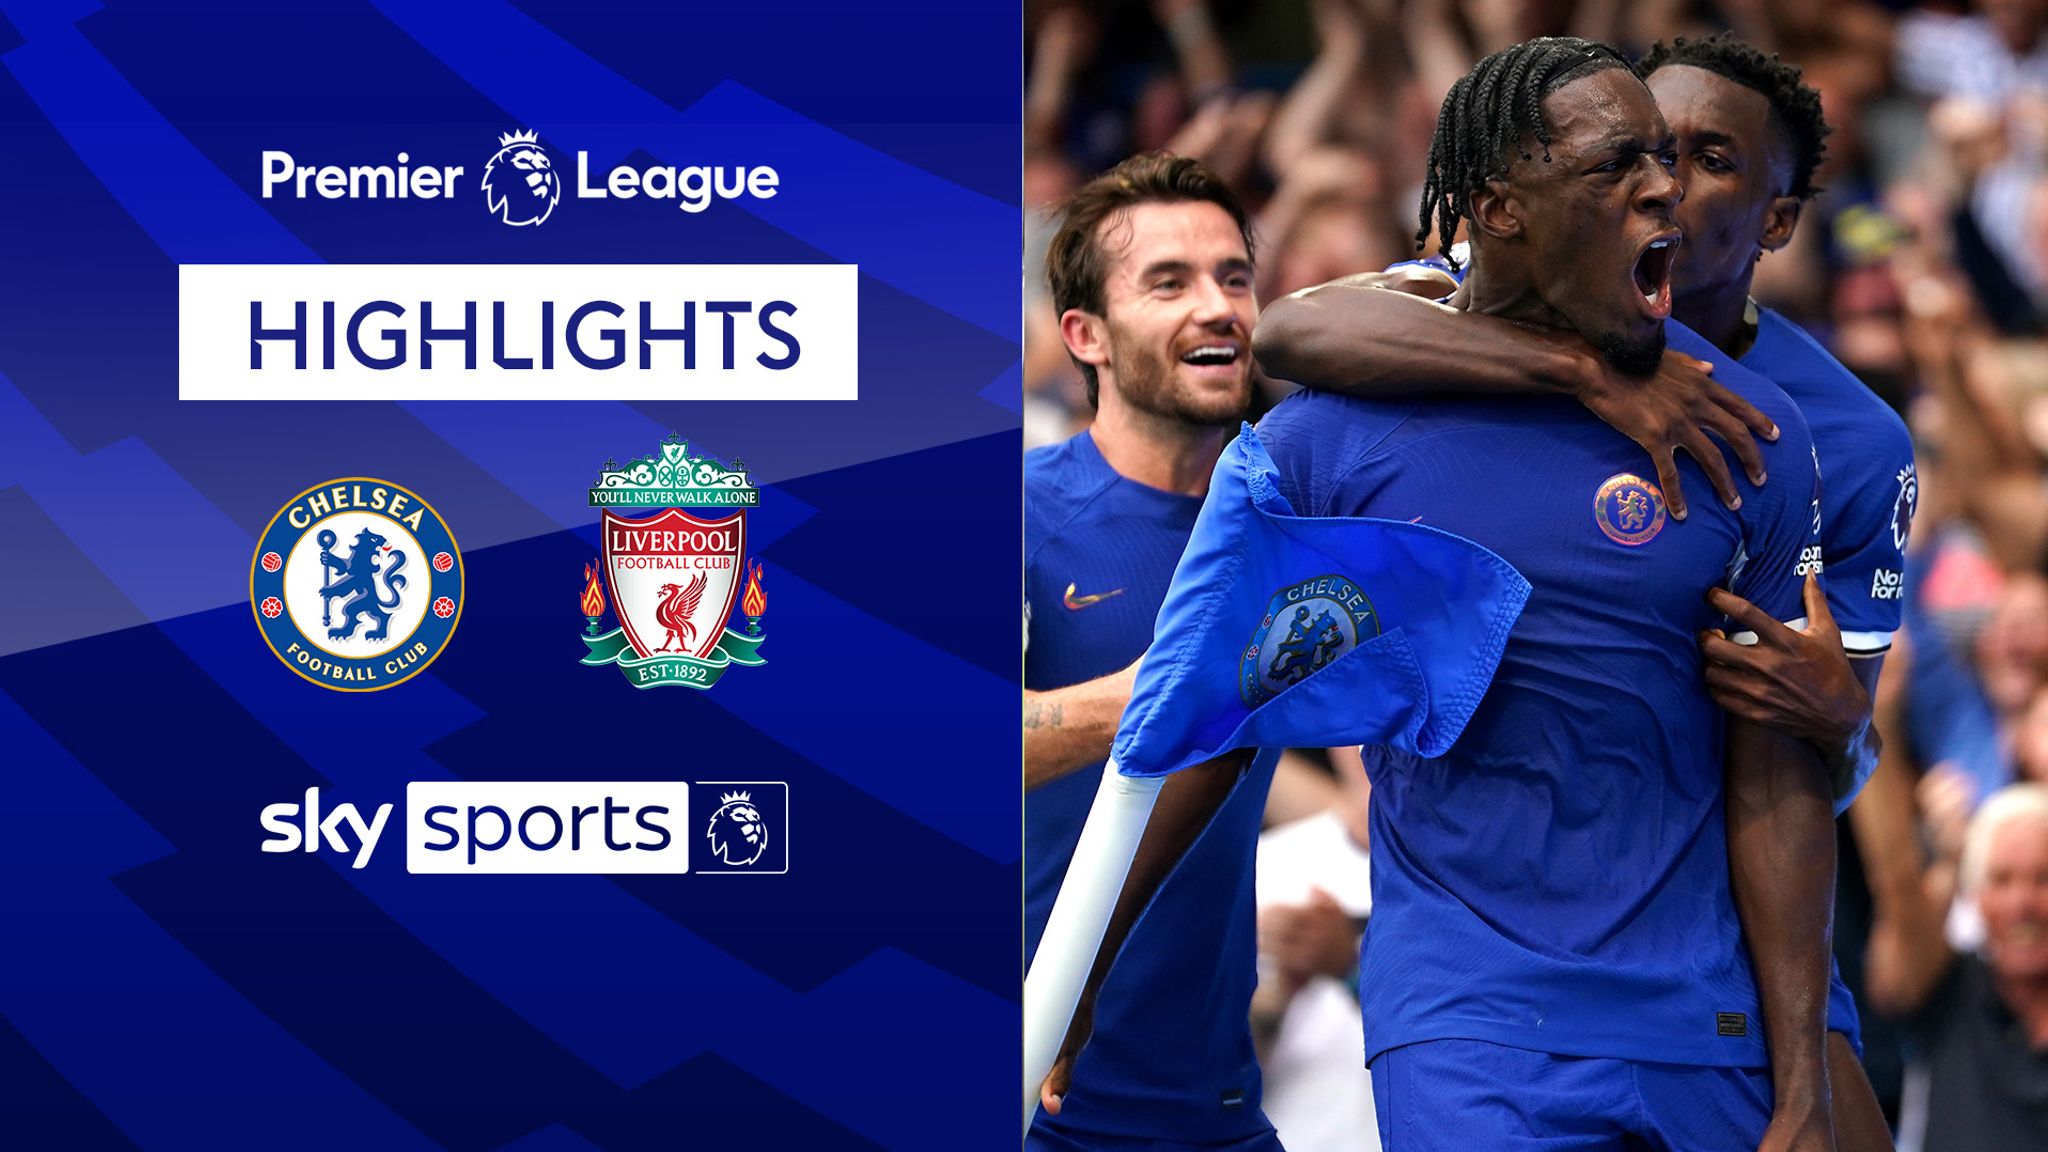 Chelsea 1-1 Liverpool Premier League highlights Video Watch TV Show Sky Sports